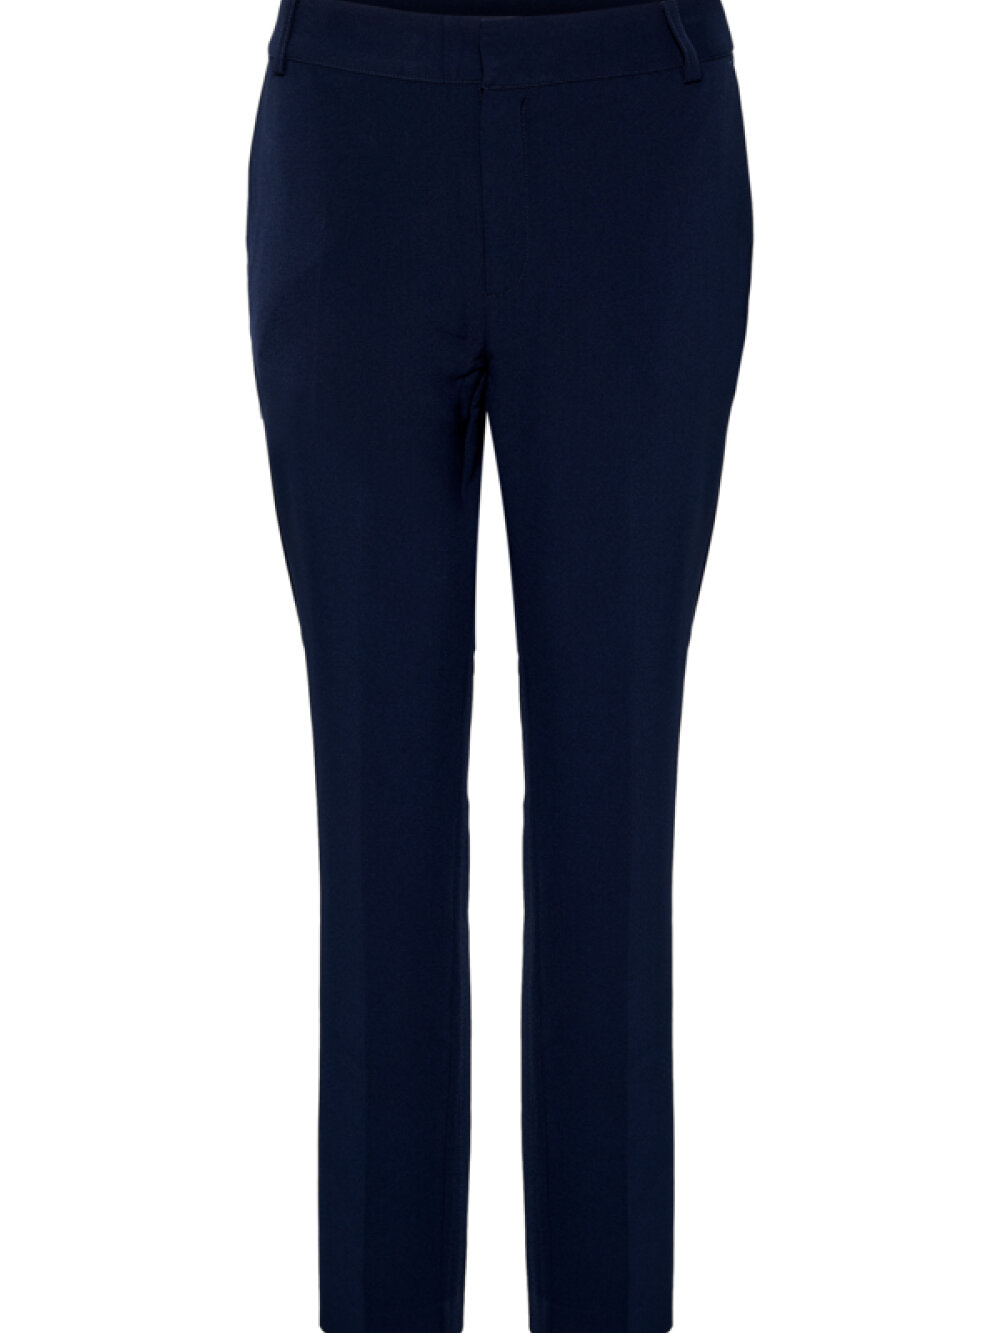 My Essential Wardrobe - 26 The Tailored Straight Pant Bukser